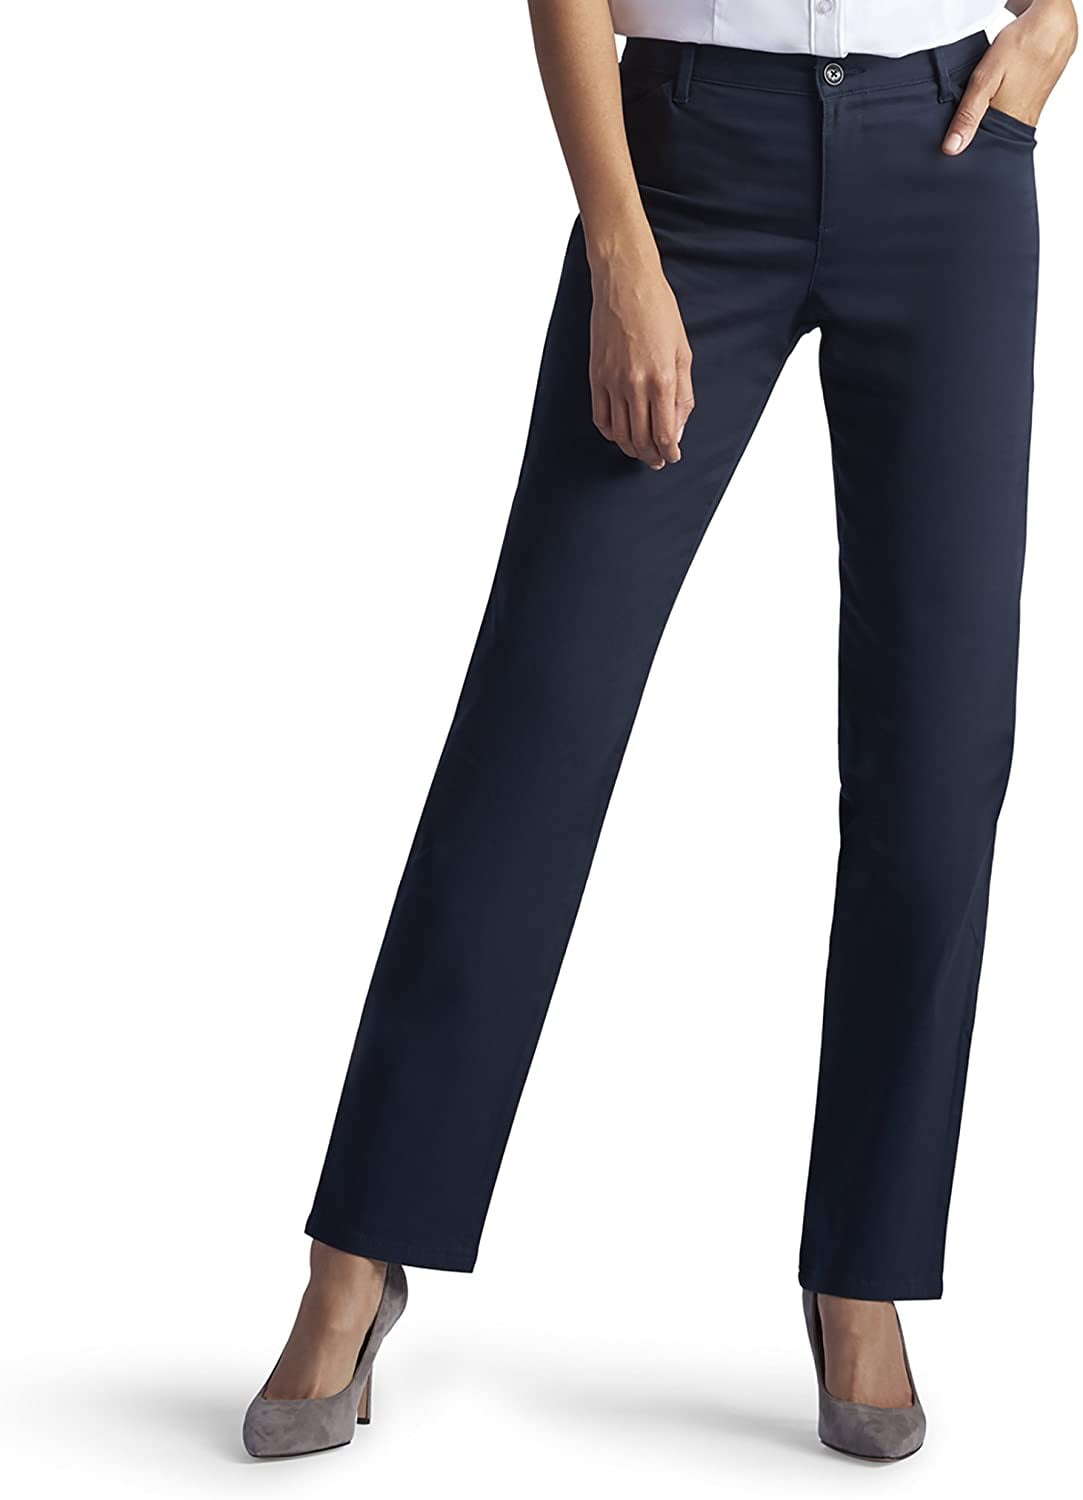 LEE Womens Relaxed Fit All Day Straight Leg Pant - Walmart.com